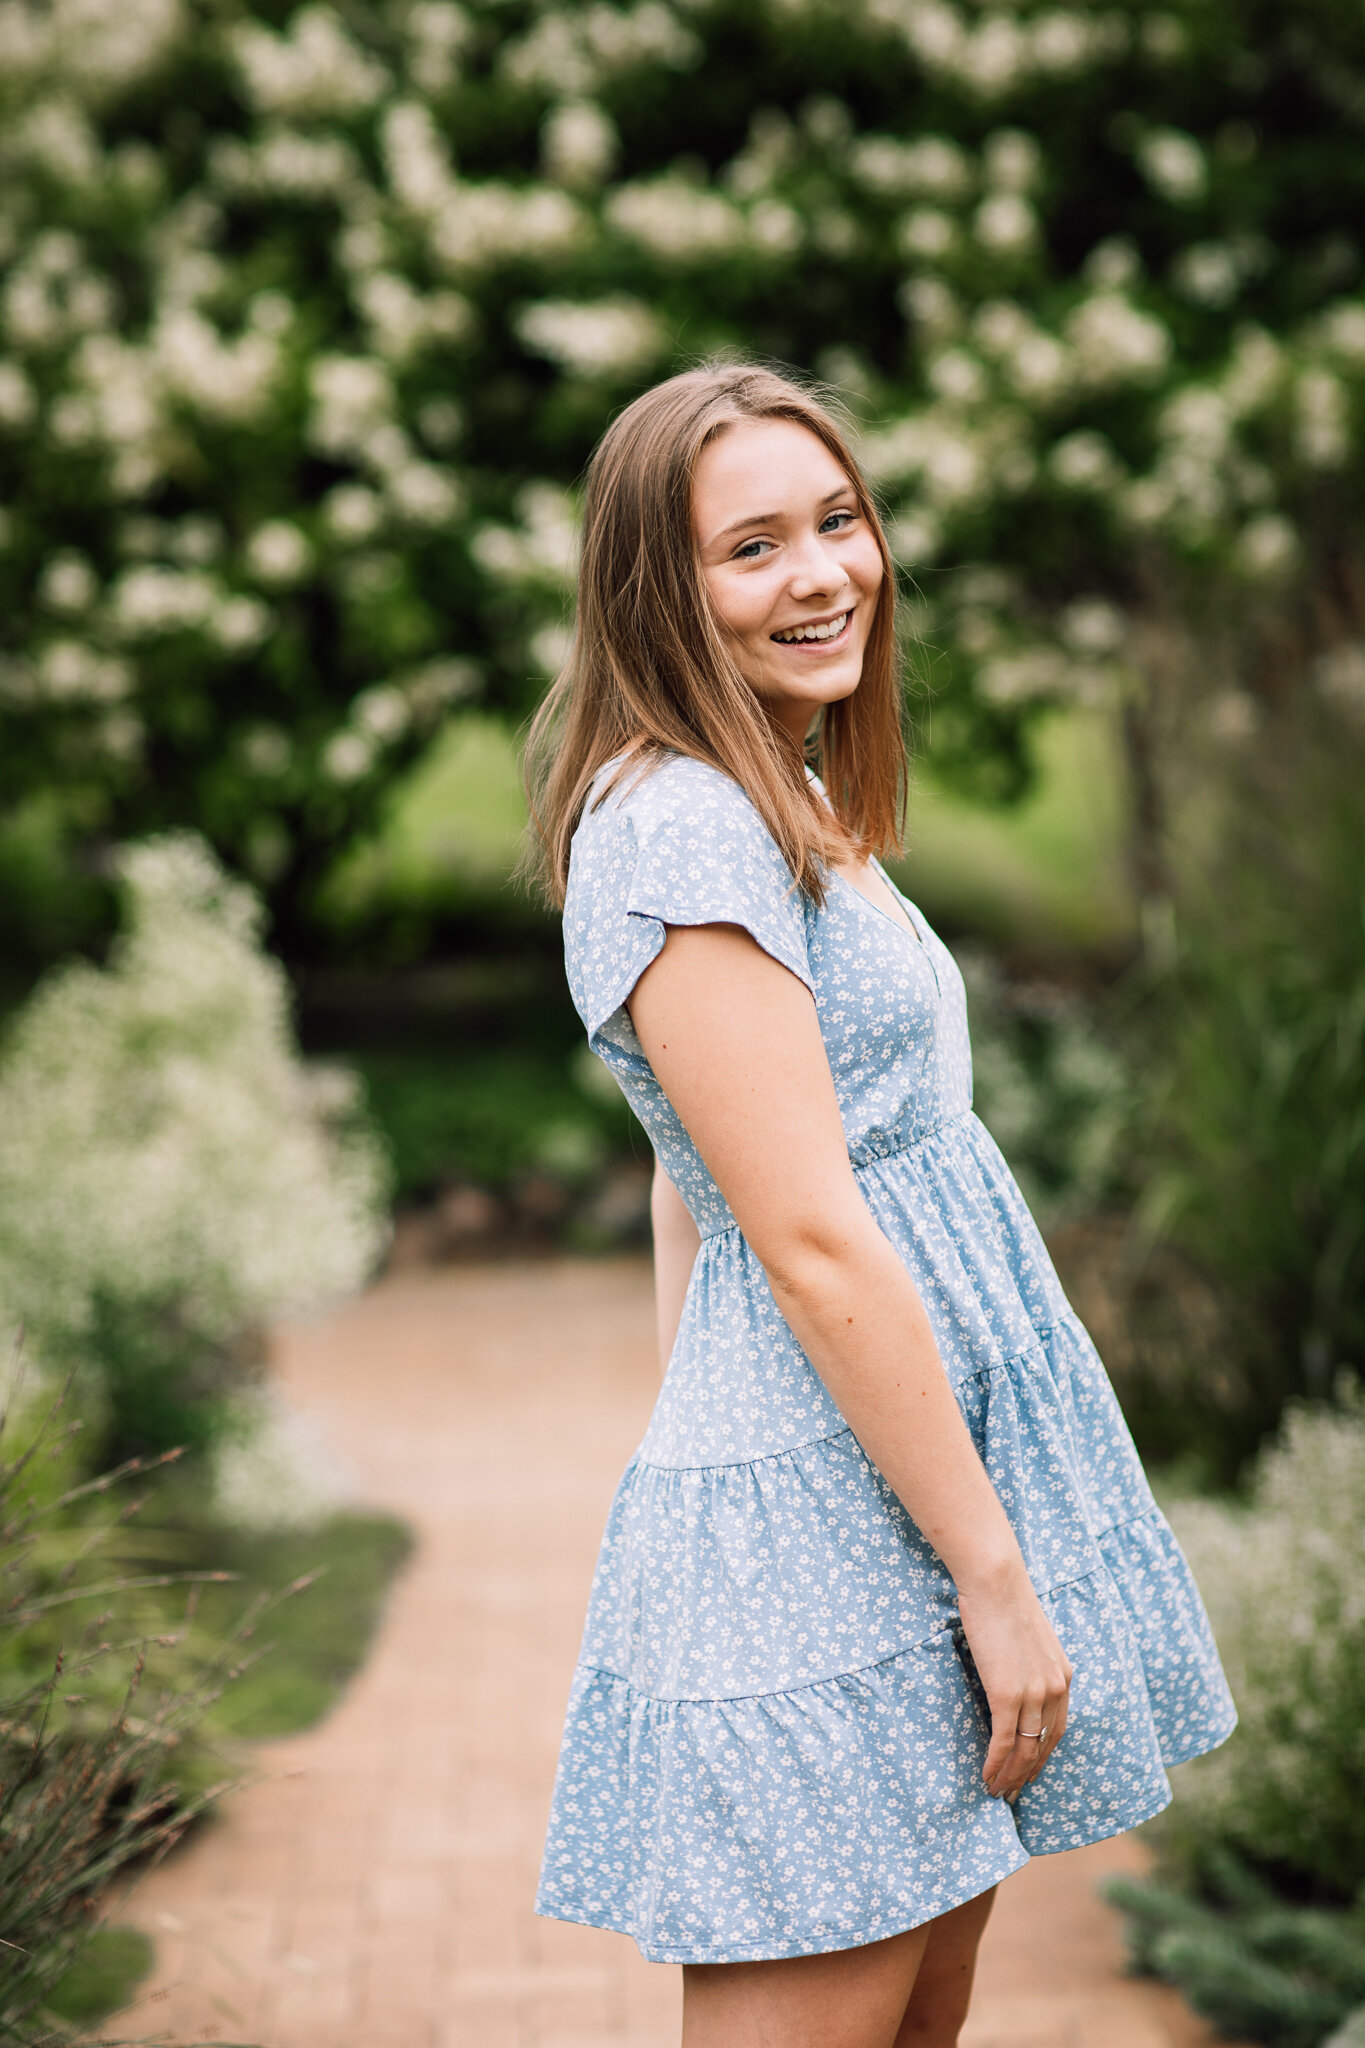 A girl in a blue dress with white flowers is twirling at the Noerenberg Memorial Gardens | Chanhassen Senior Photographer